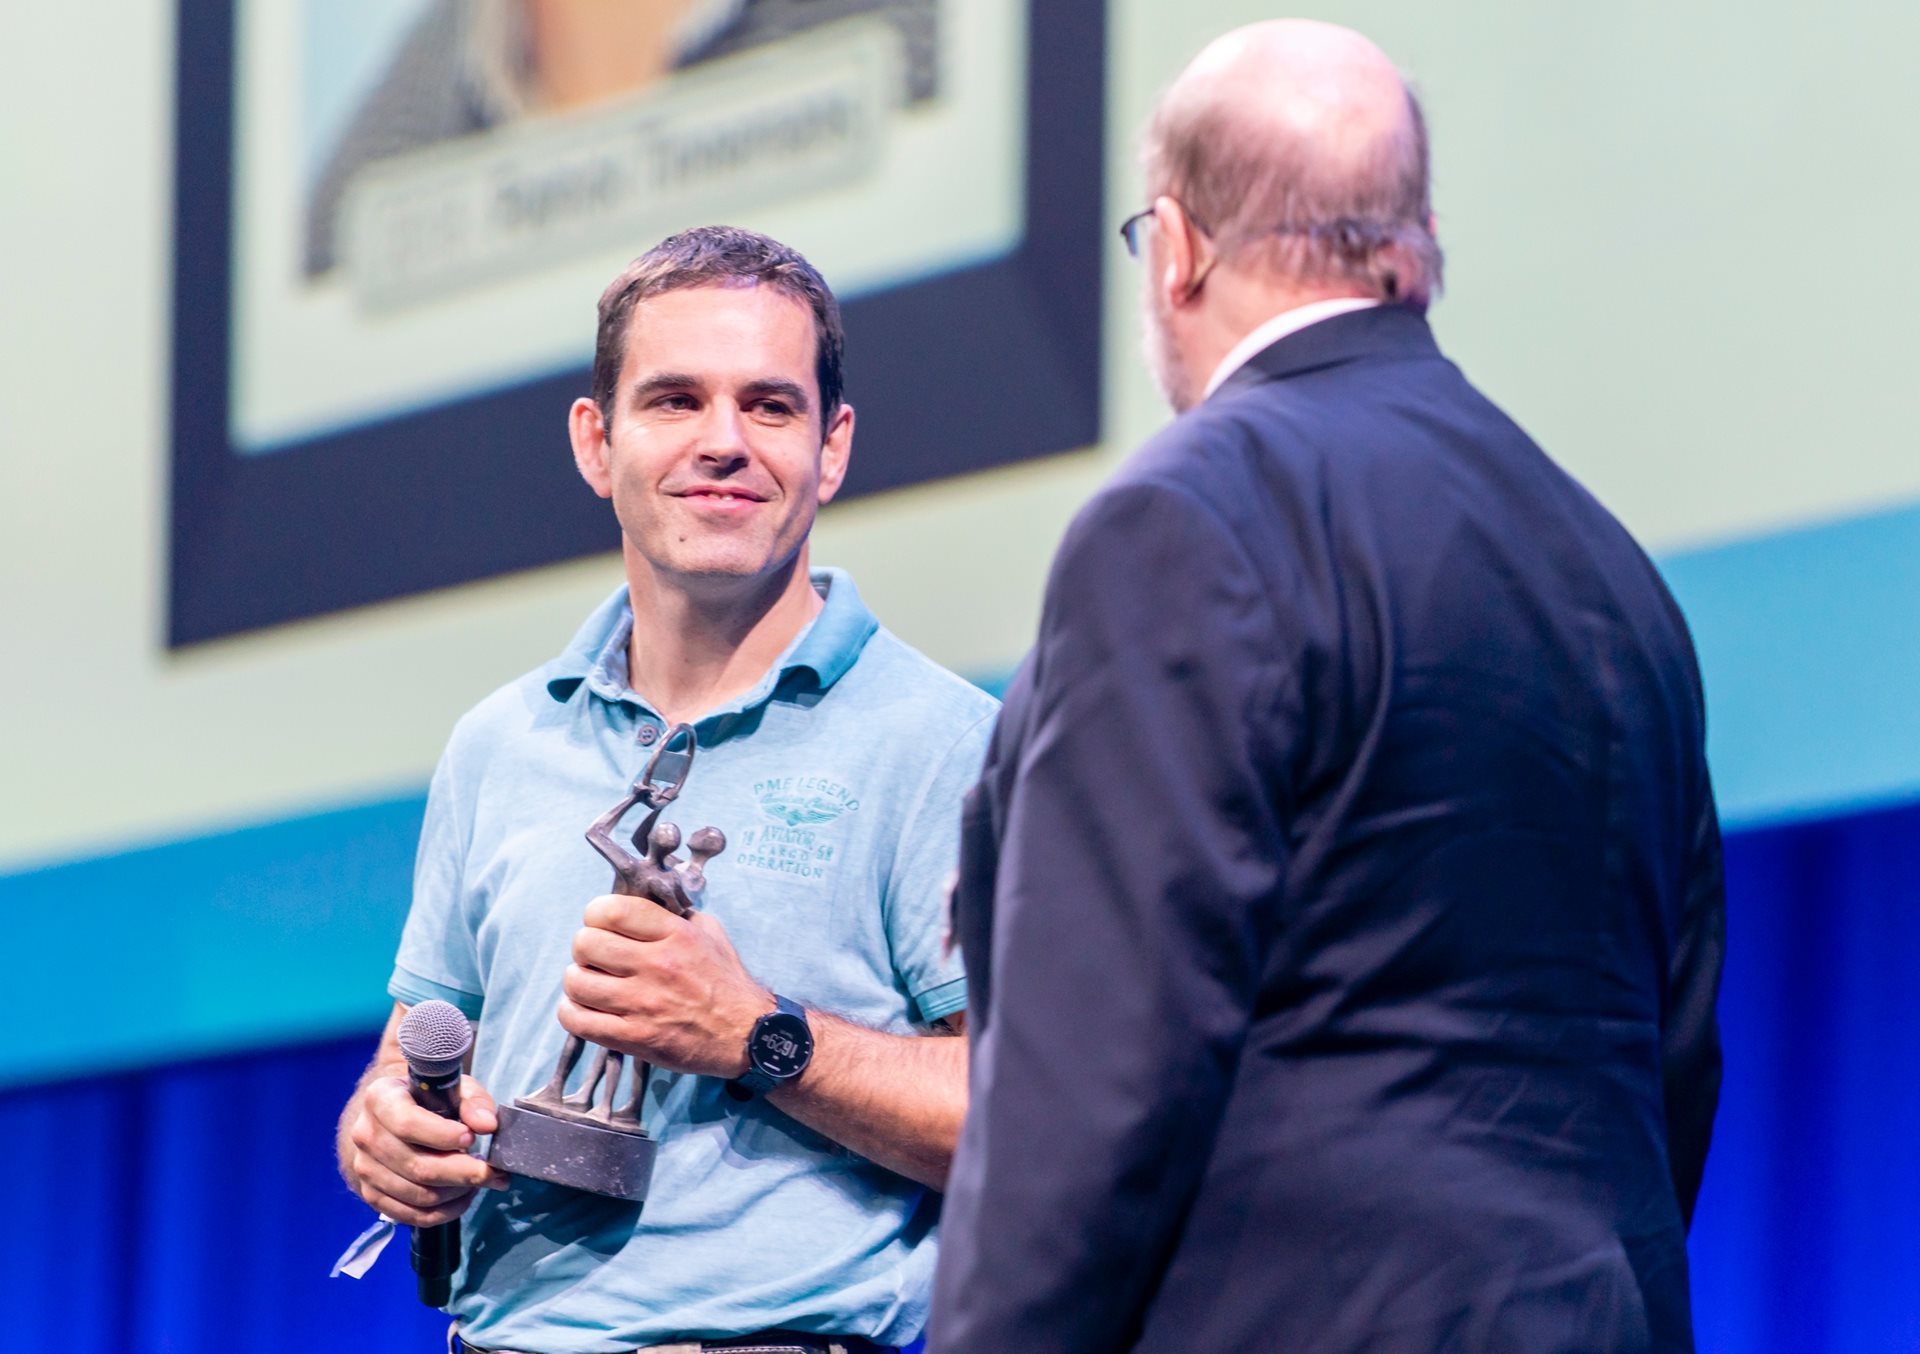 ASML fellow Patrick Tinnemans receives his award at the ASML Technology Conference in 2018